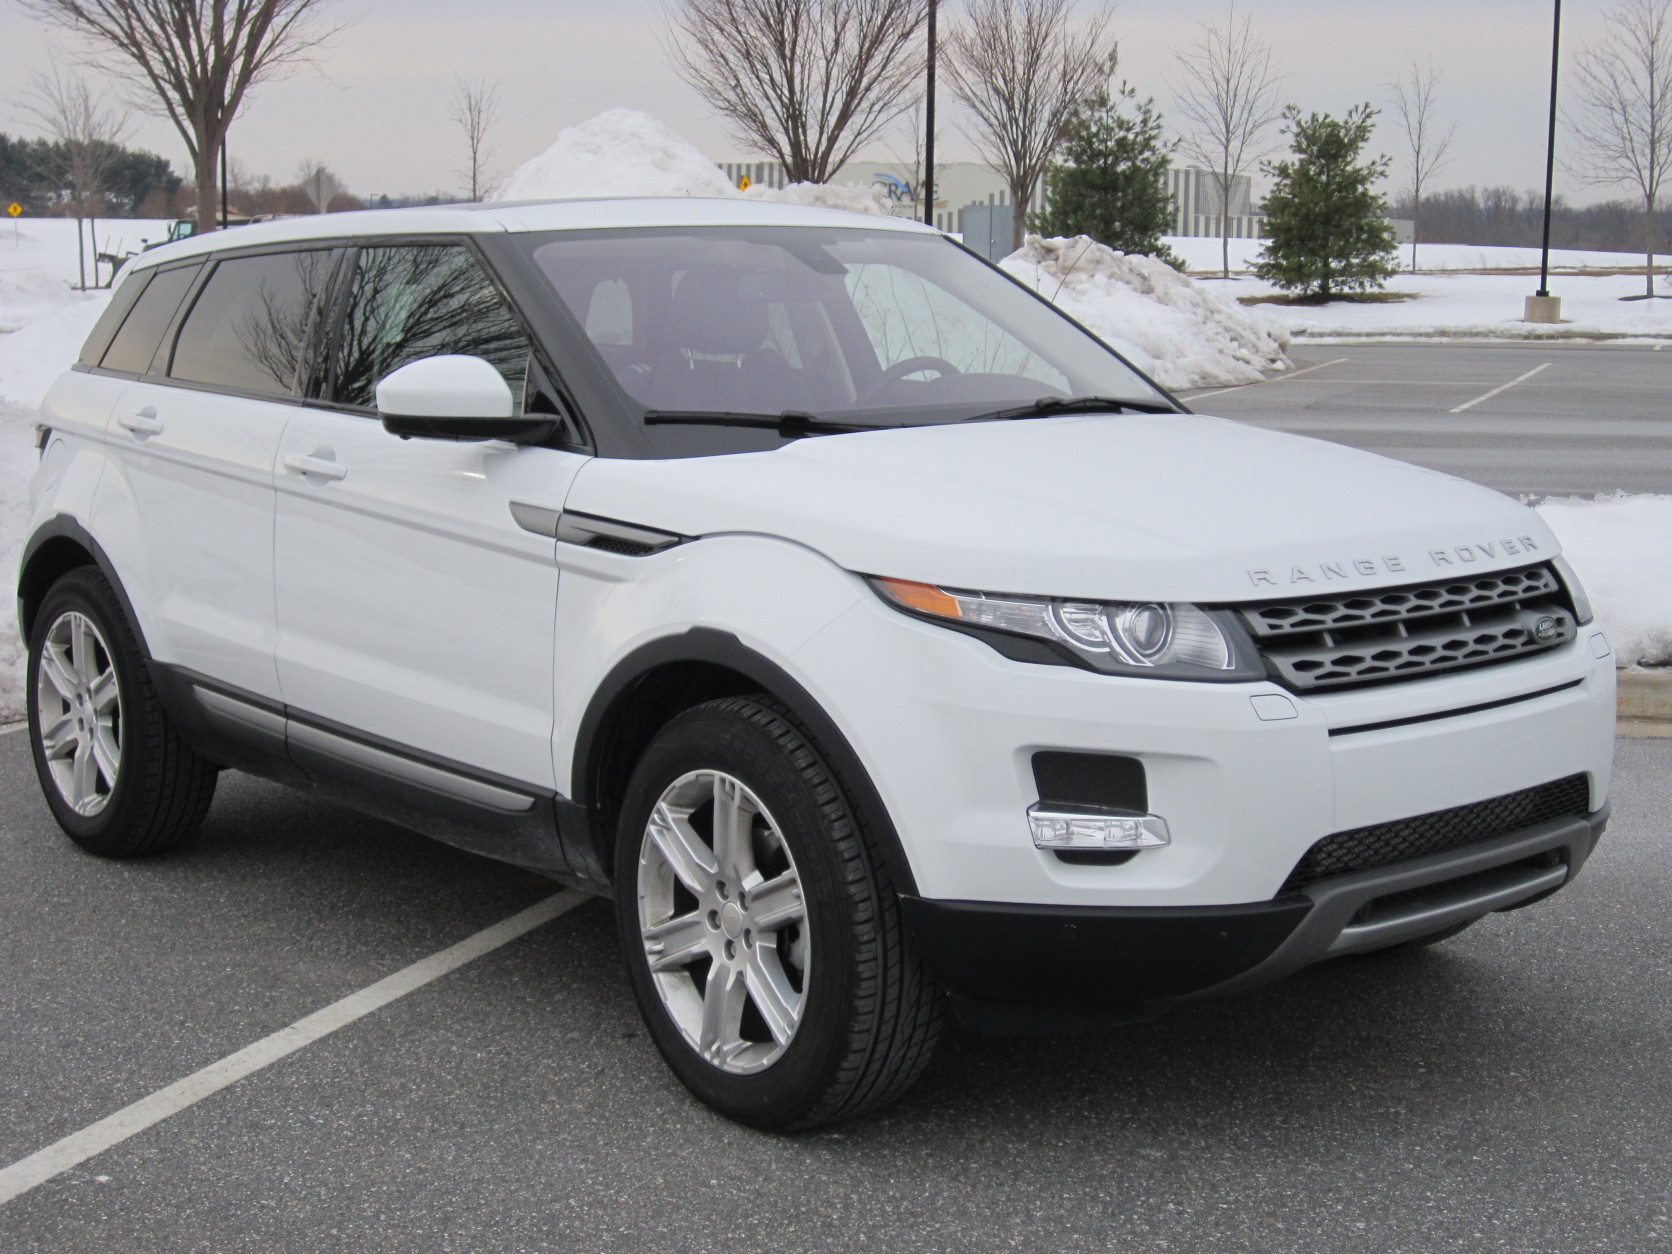 With stand-out looks outside and a high-class comfortable interior, the Evoque makes a strong statement on the road.  (WTOP/Mike Parris)